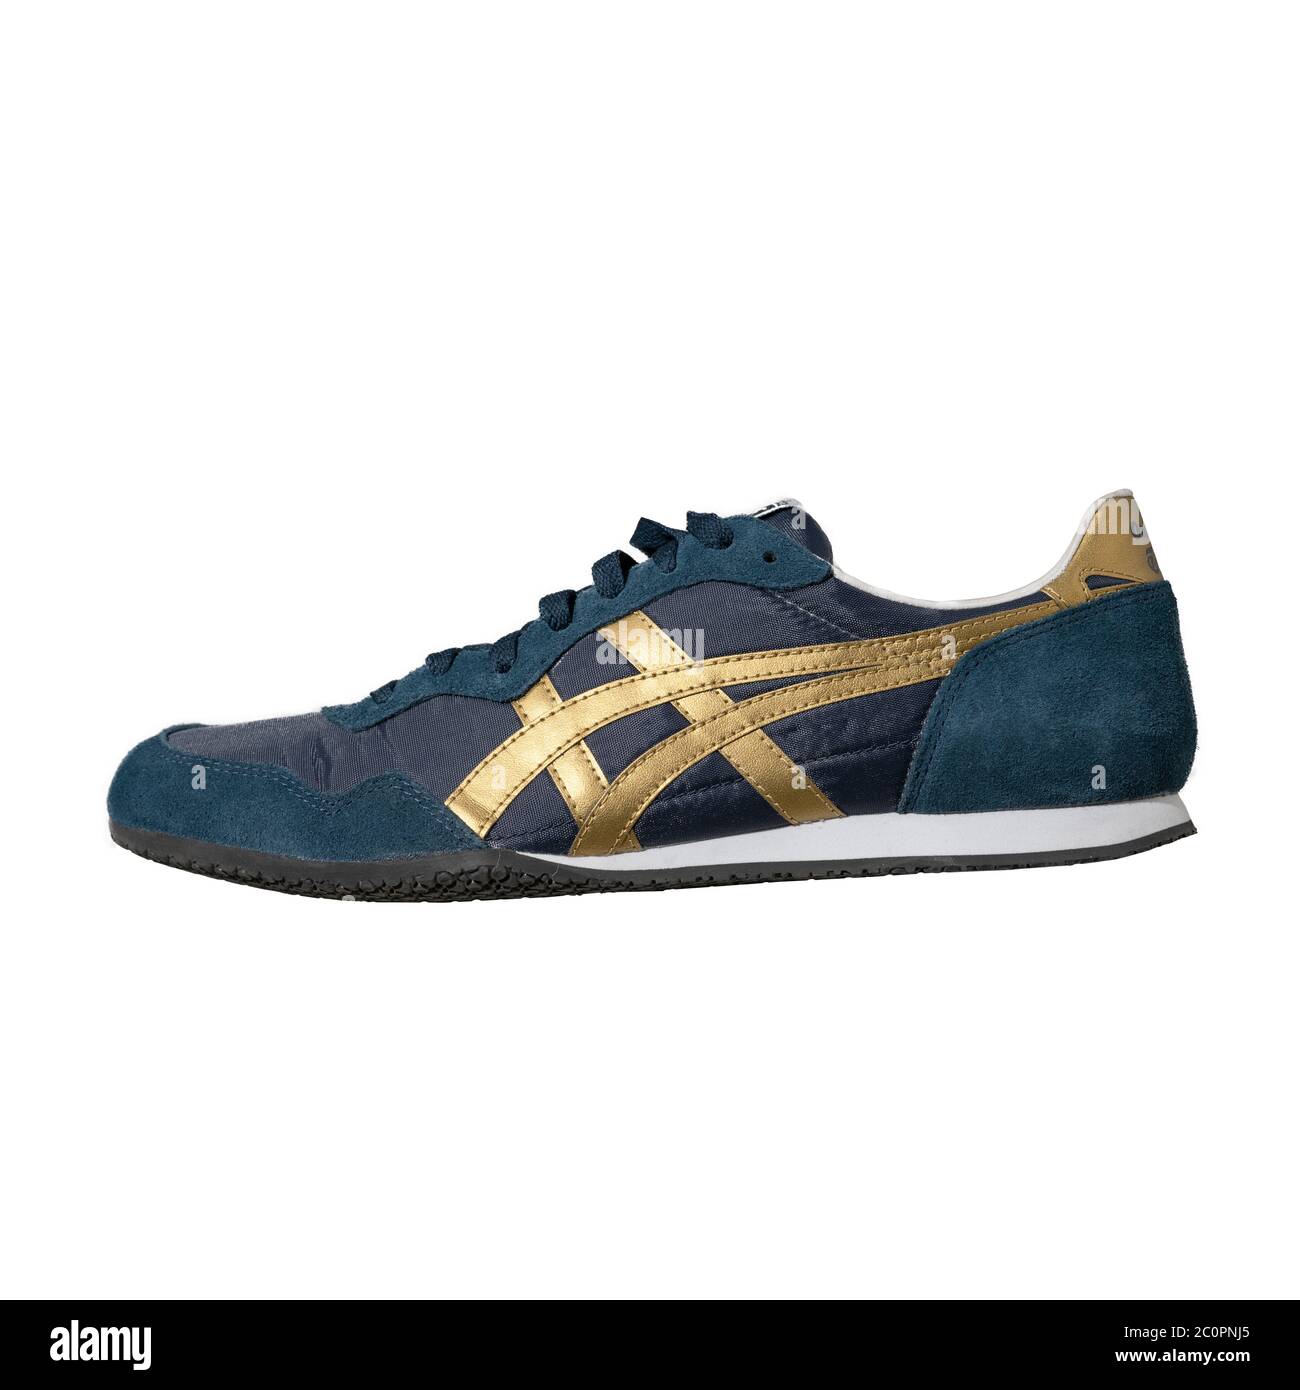 Blue Asics brand sneakers with gold accents. Onitsuka Tiger brand. Convenient easy lace-up shoes for sport isolated on color background. Lifestyle Stock Photo -